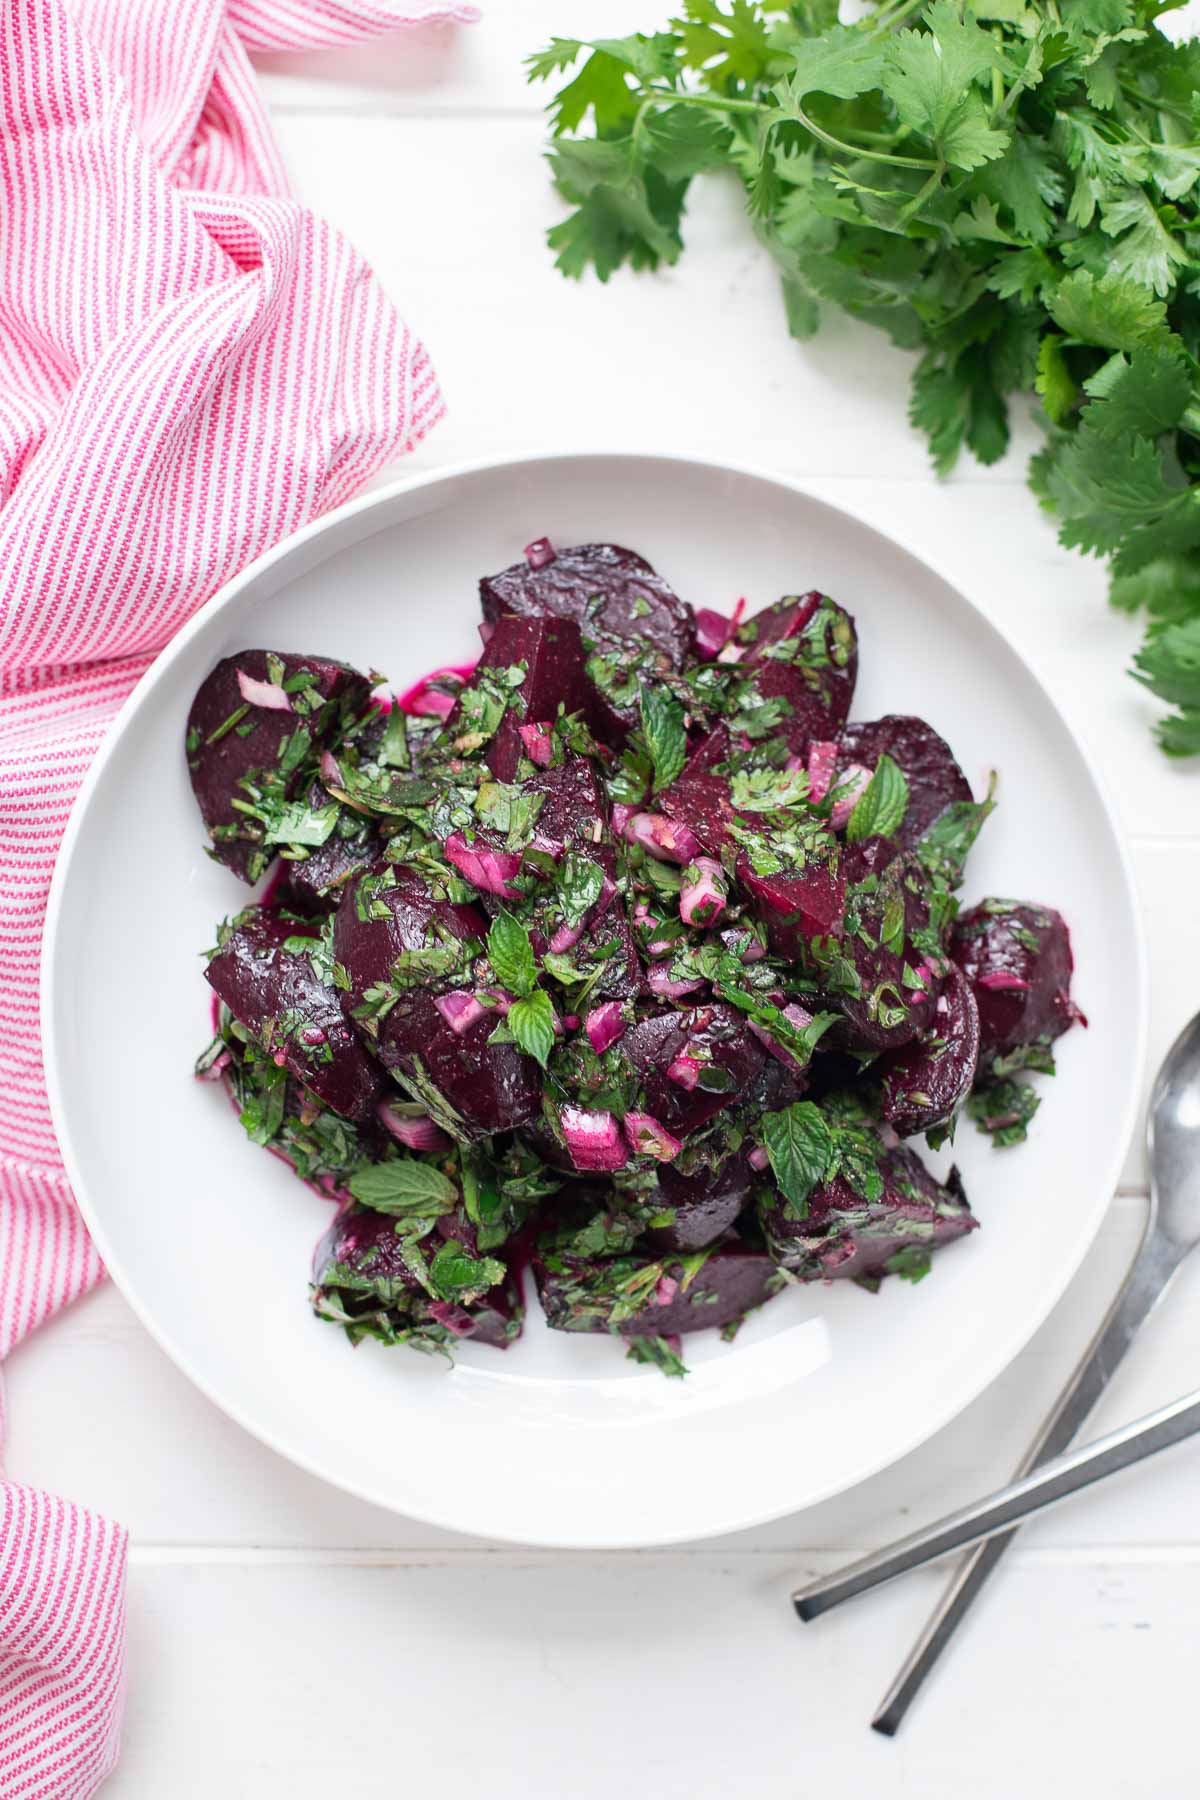 Beetroot Salad with fresh Herbs Parsley, Mint, Cilantro)